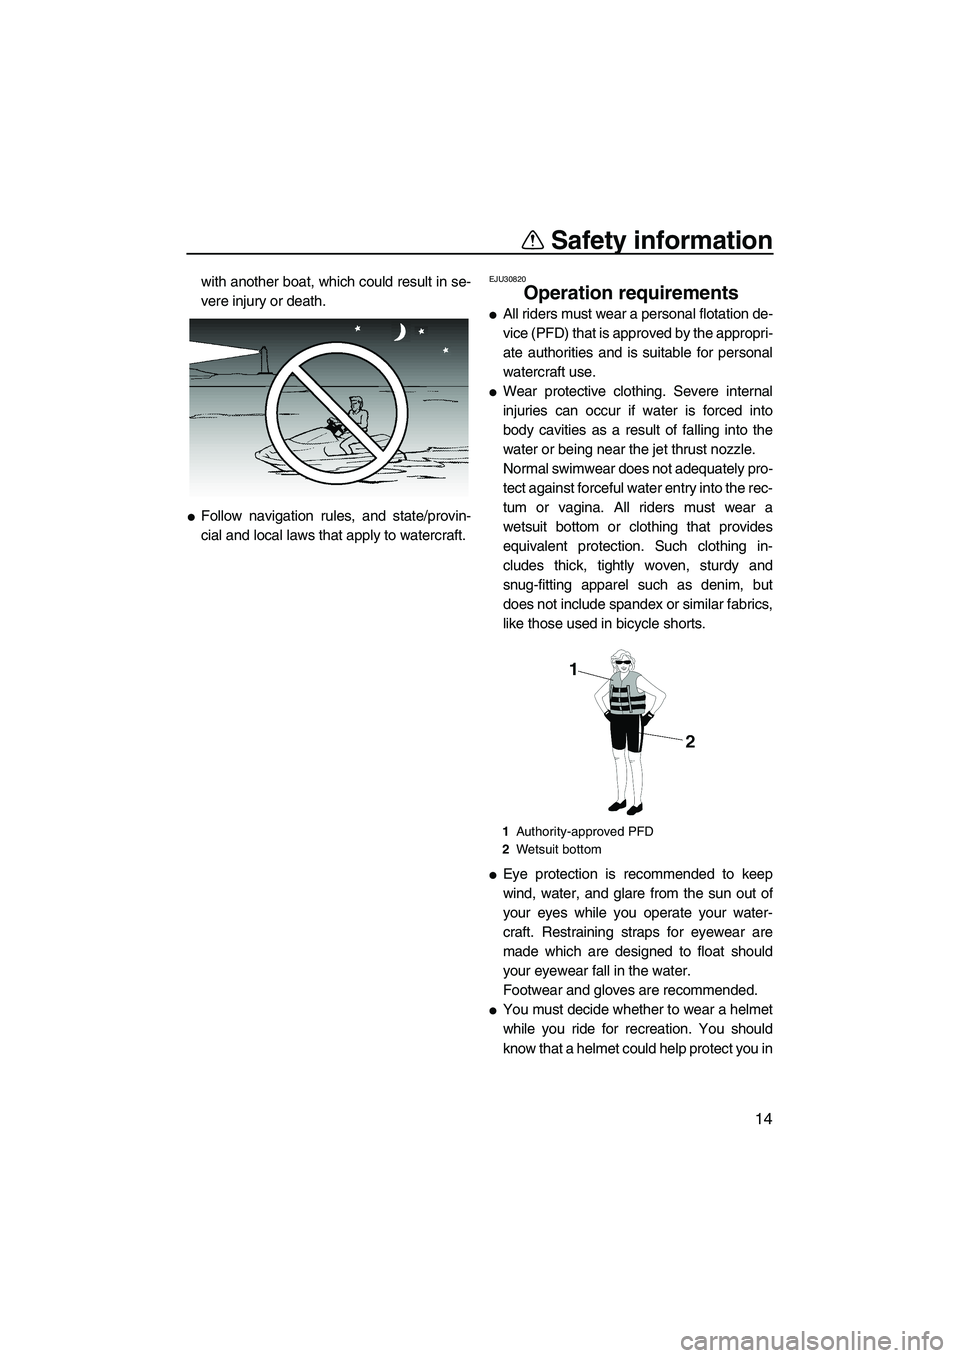 YAMAHA VX CRUISER 2007  Owners Manual Safety information
14
with another boat, which could result in se-
vere injury or death.
Follow navigation rules, and state/provin-
cial and local laws that apply to watercraft.
EJU30820
Operation re